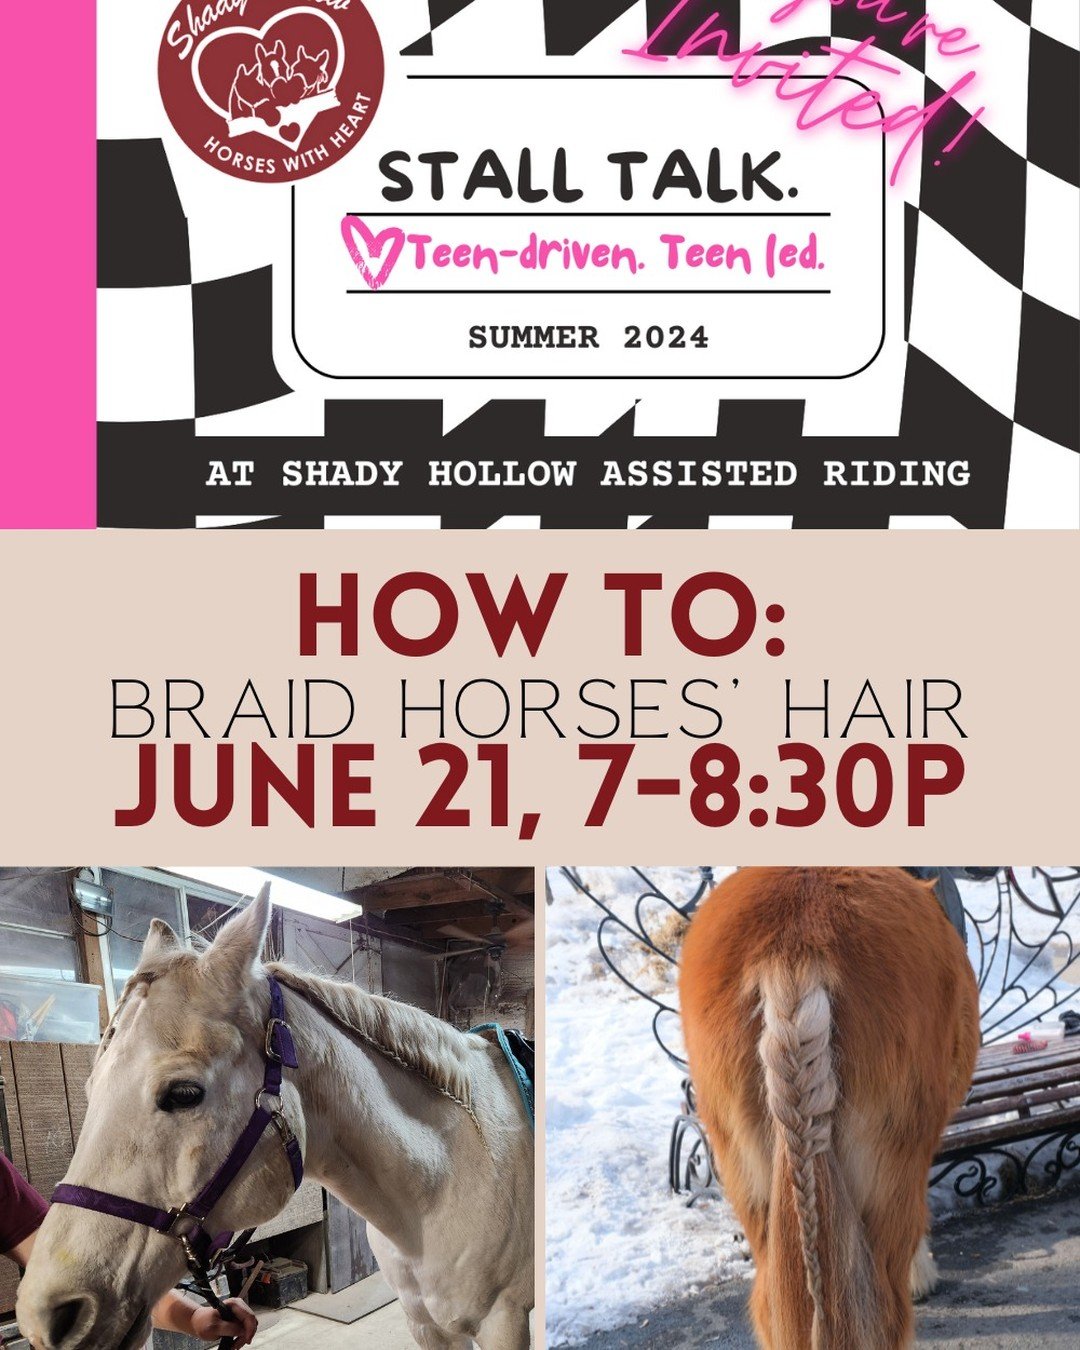 The first Stall Talk of the year is coming up on June 21st from 7-8:30pm!

Ages 11-17 - Teen created and led

hugahorse.com to register!

#horsebraids #hugahorse